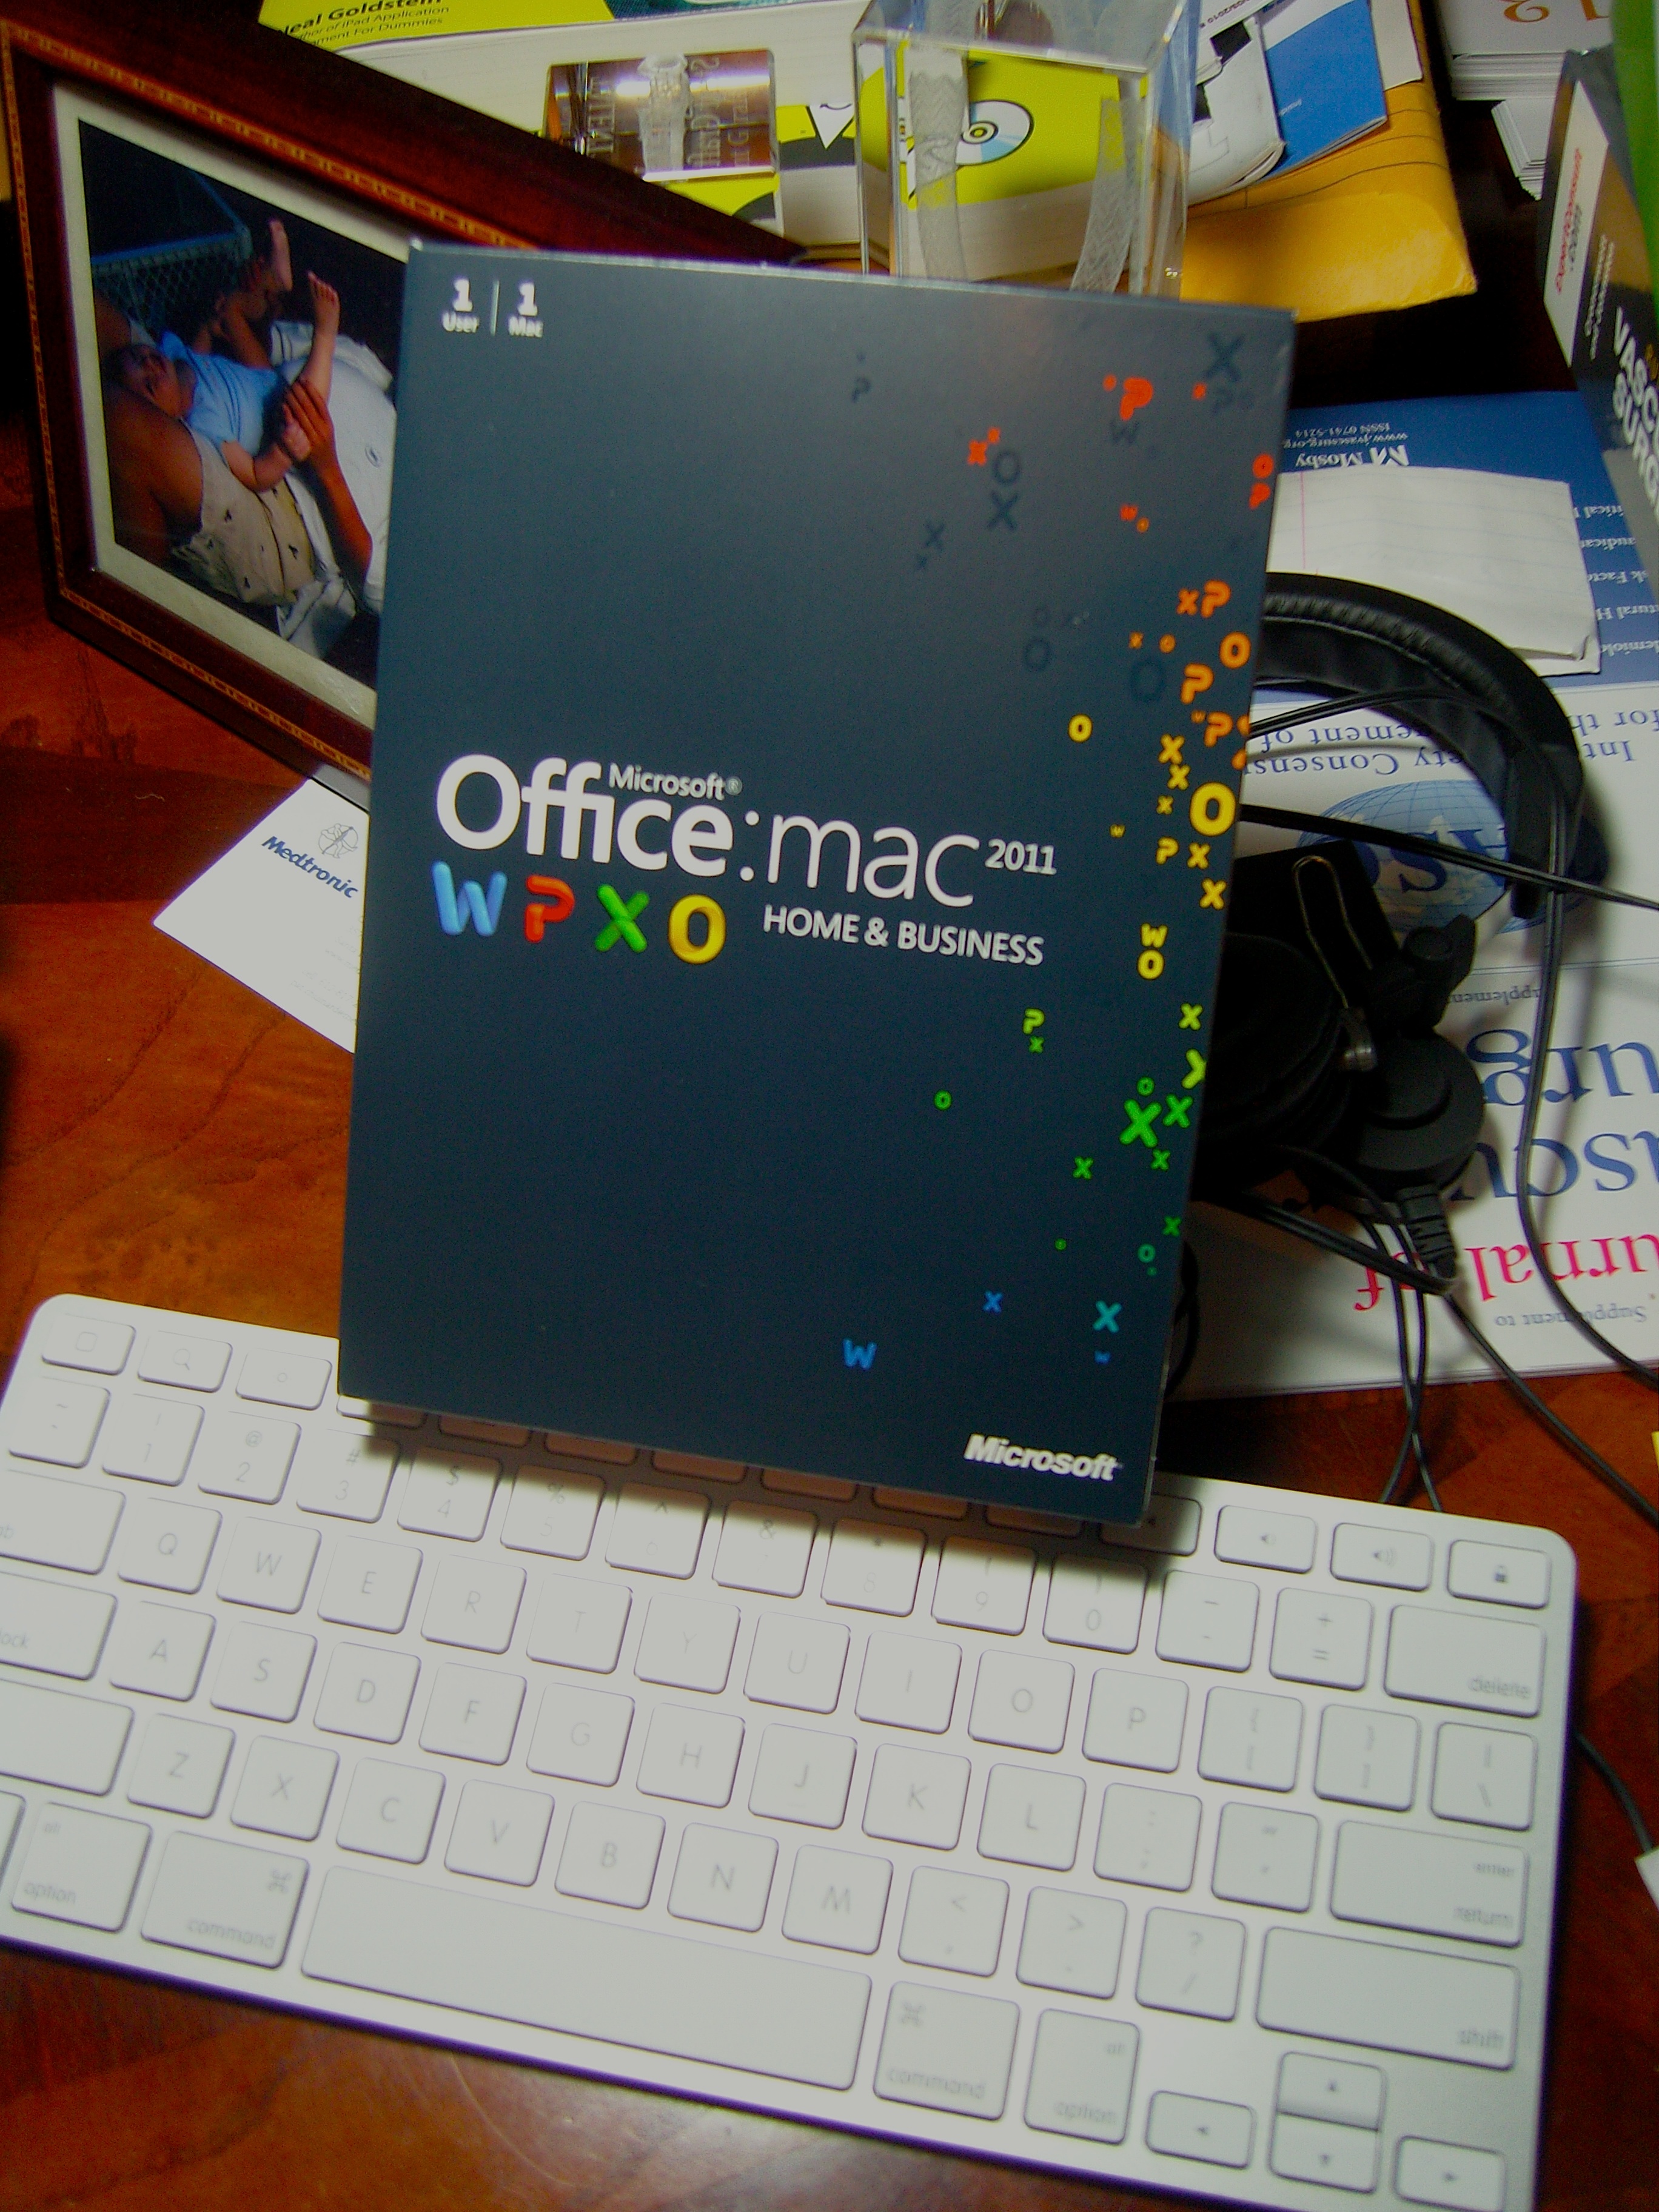 Download Access For Mac 2011